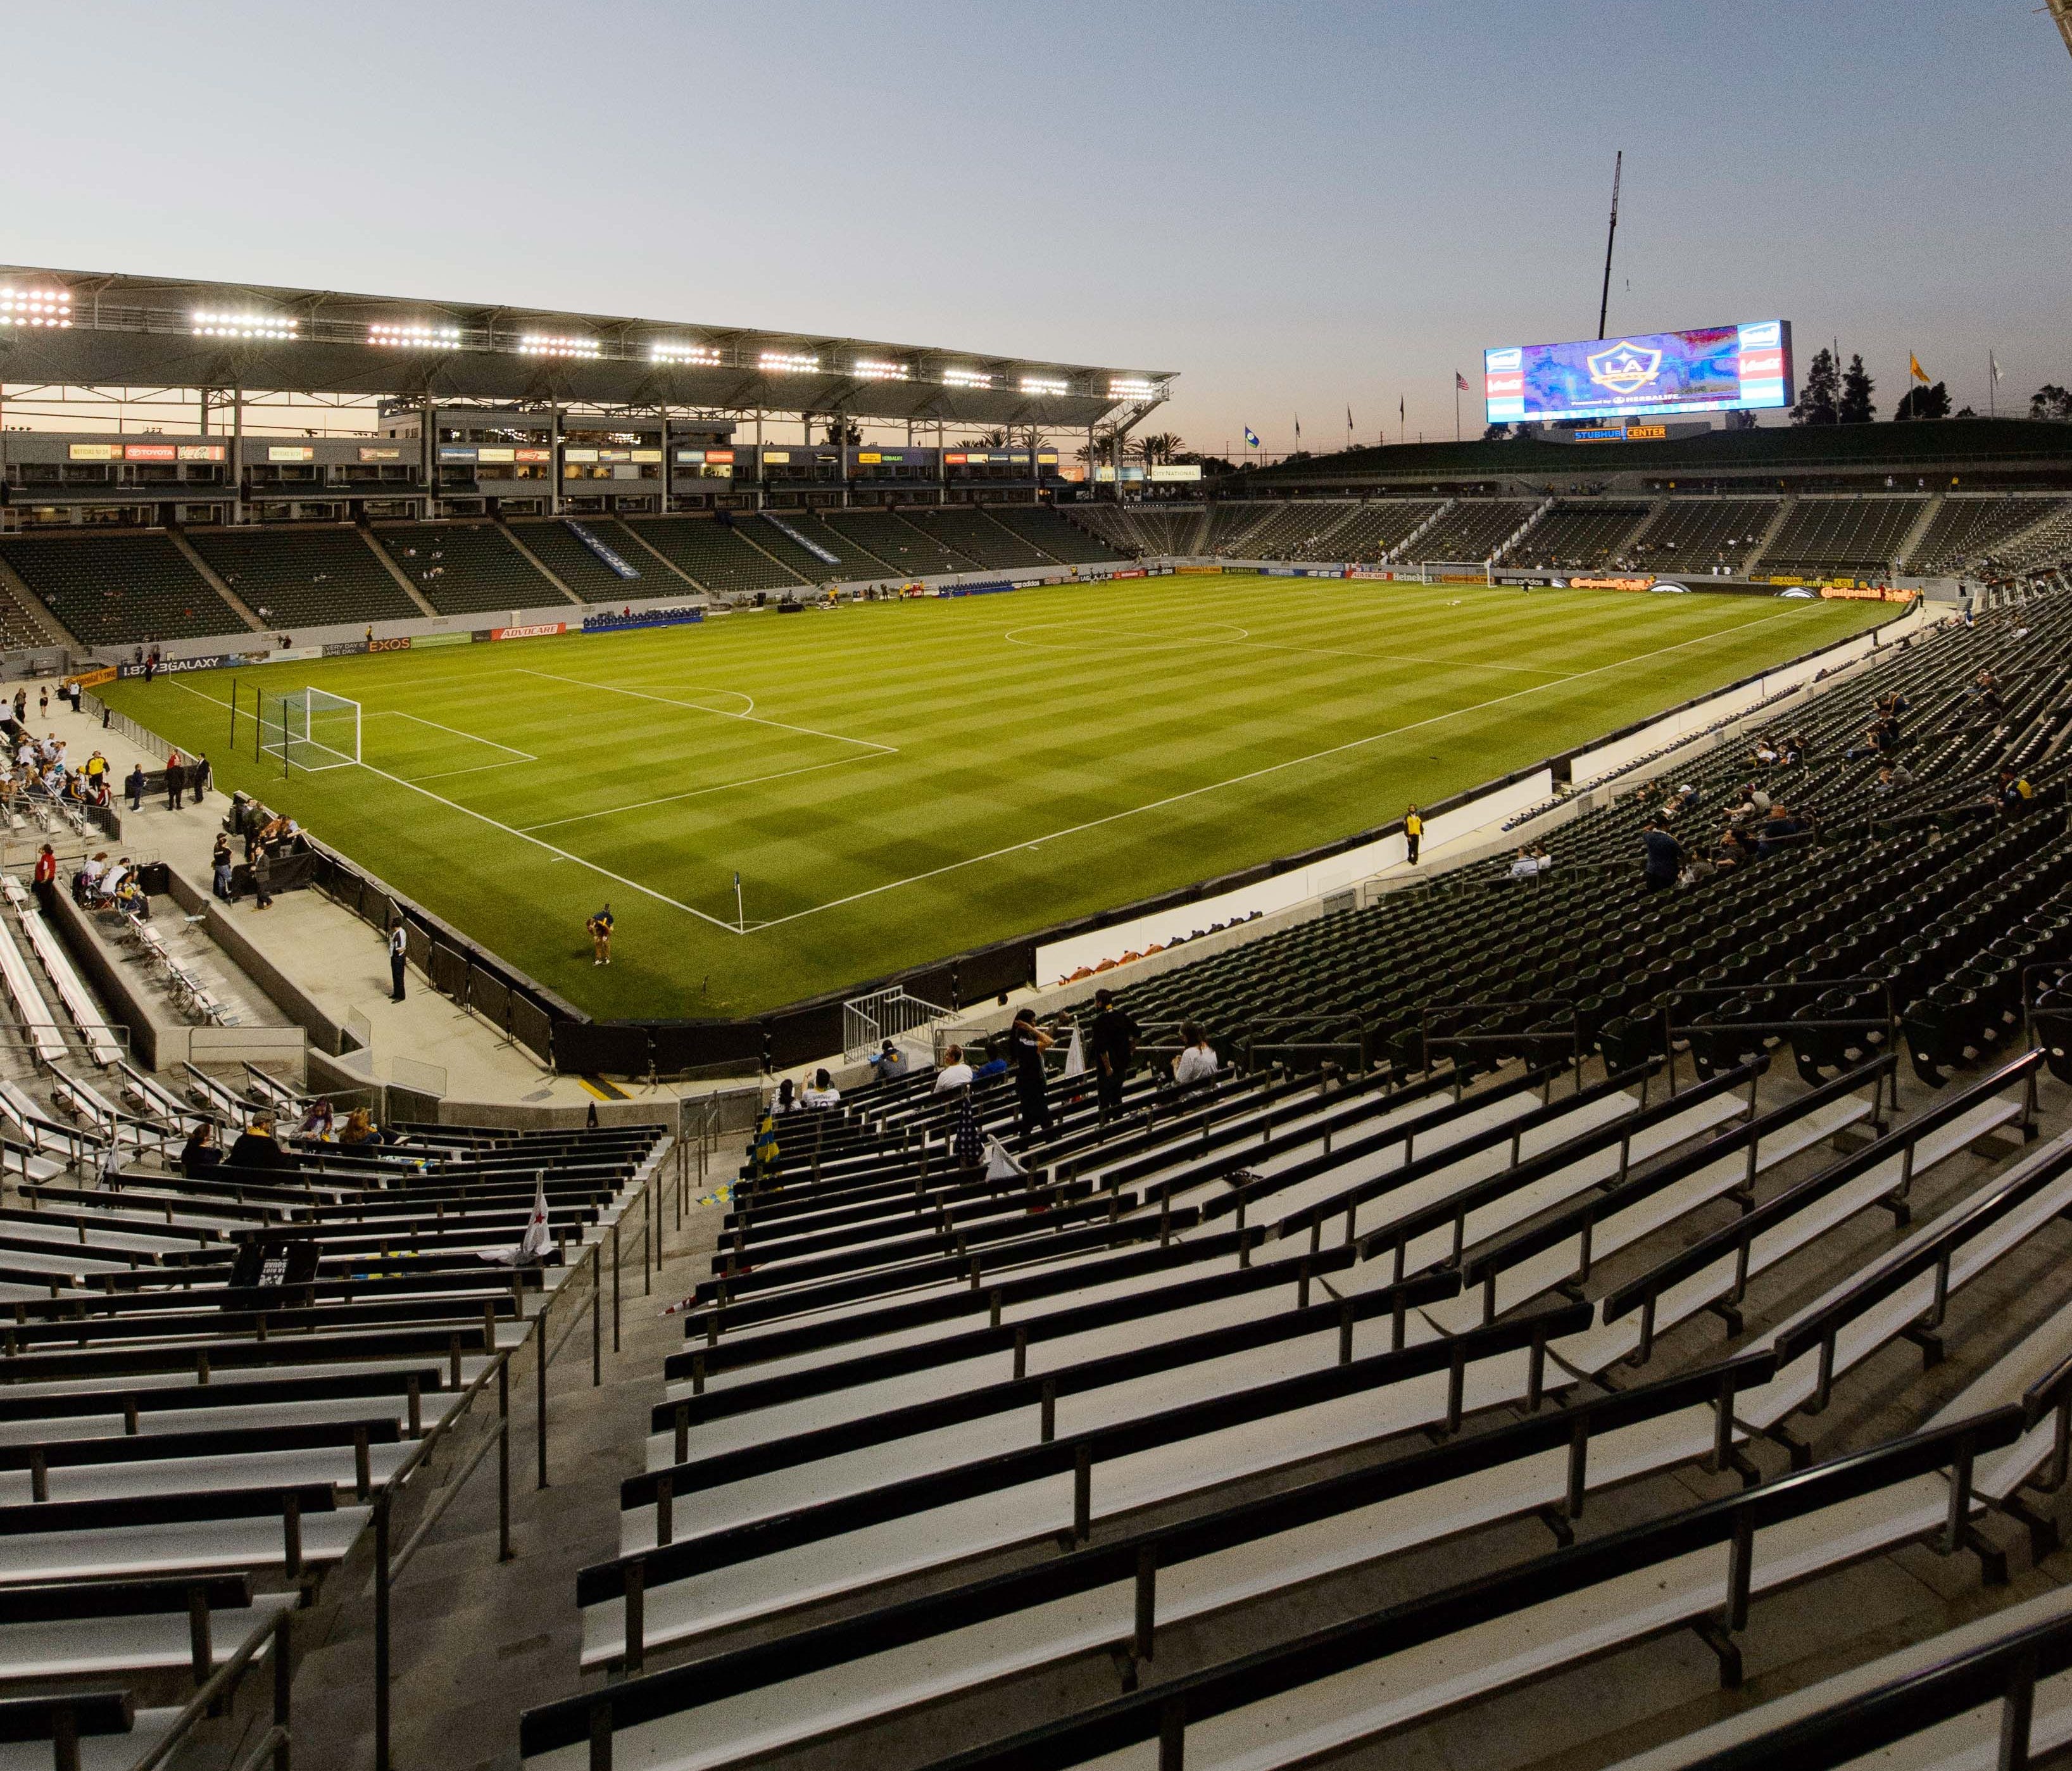 A general view of the StubHub Center in Carson, Calif.